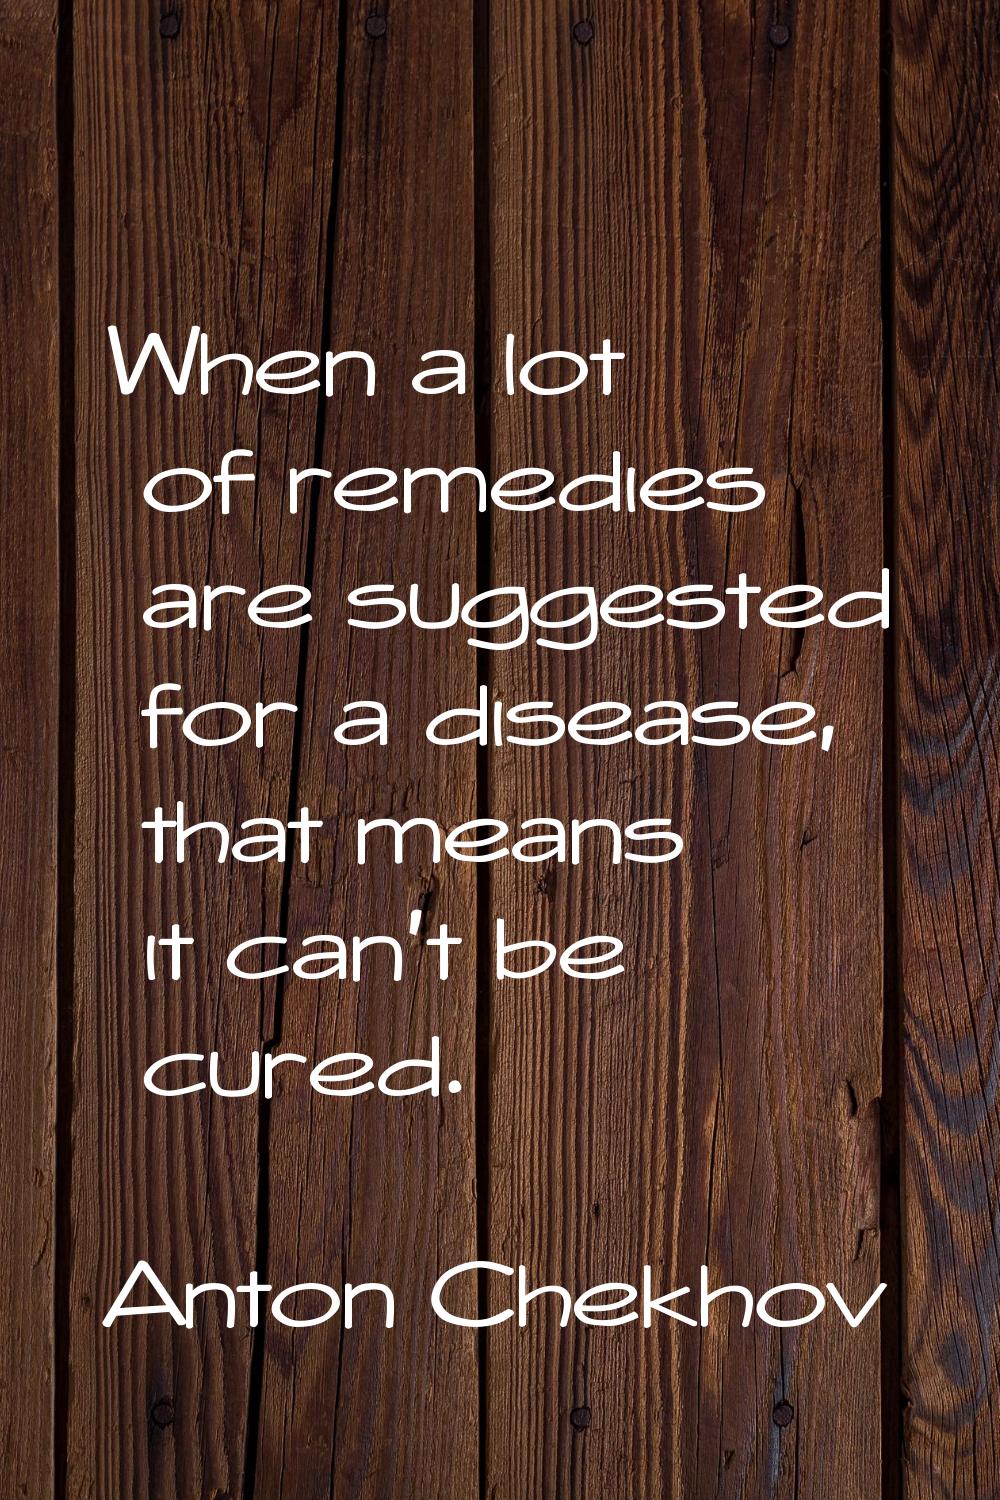 When a lot of remedies are suggested for a disease, that means it can't be cured.